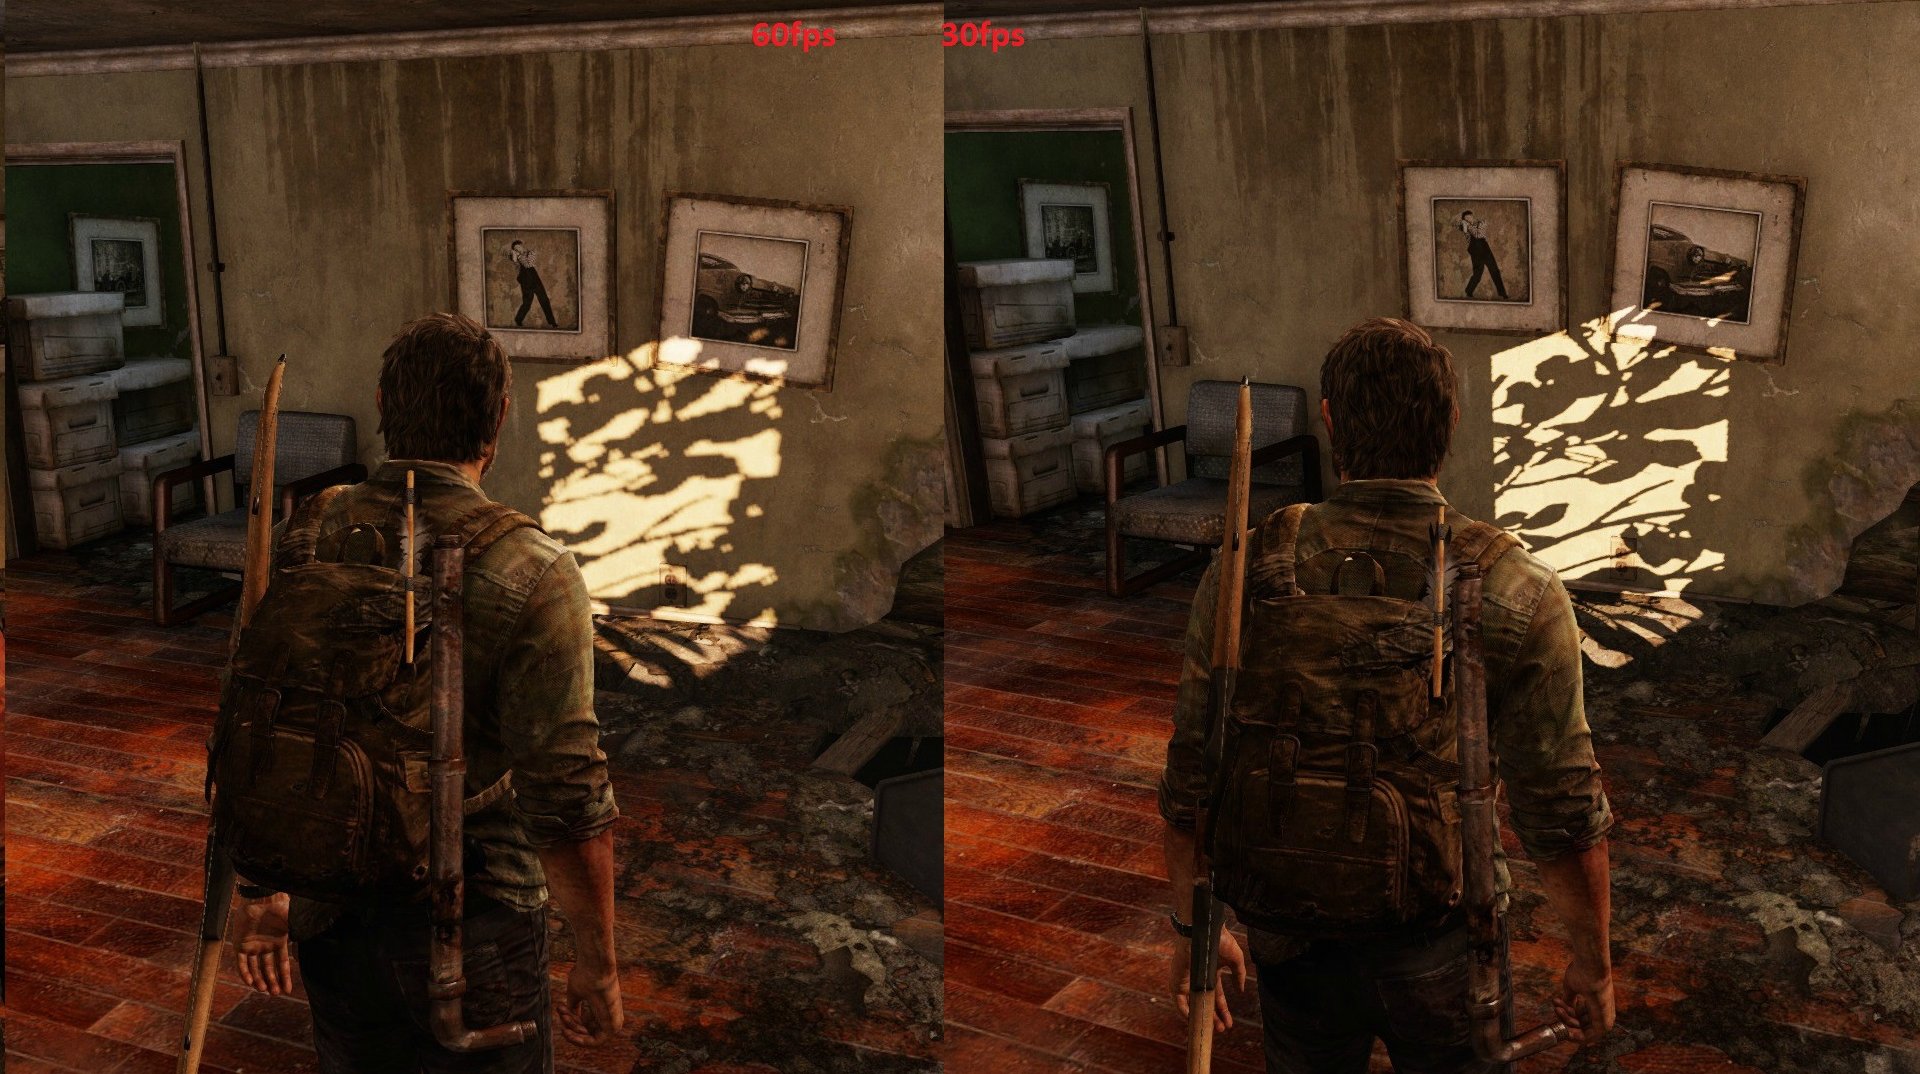 http://news.softpedia.com/images/news2/The-Last-of-Us-Remastered-PS4-Gets-30fps-vs-60fps-Screenshot-Shadow-Comparison-452314-2.jpg